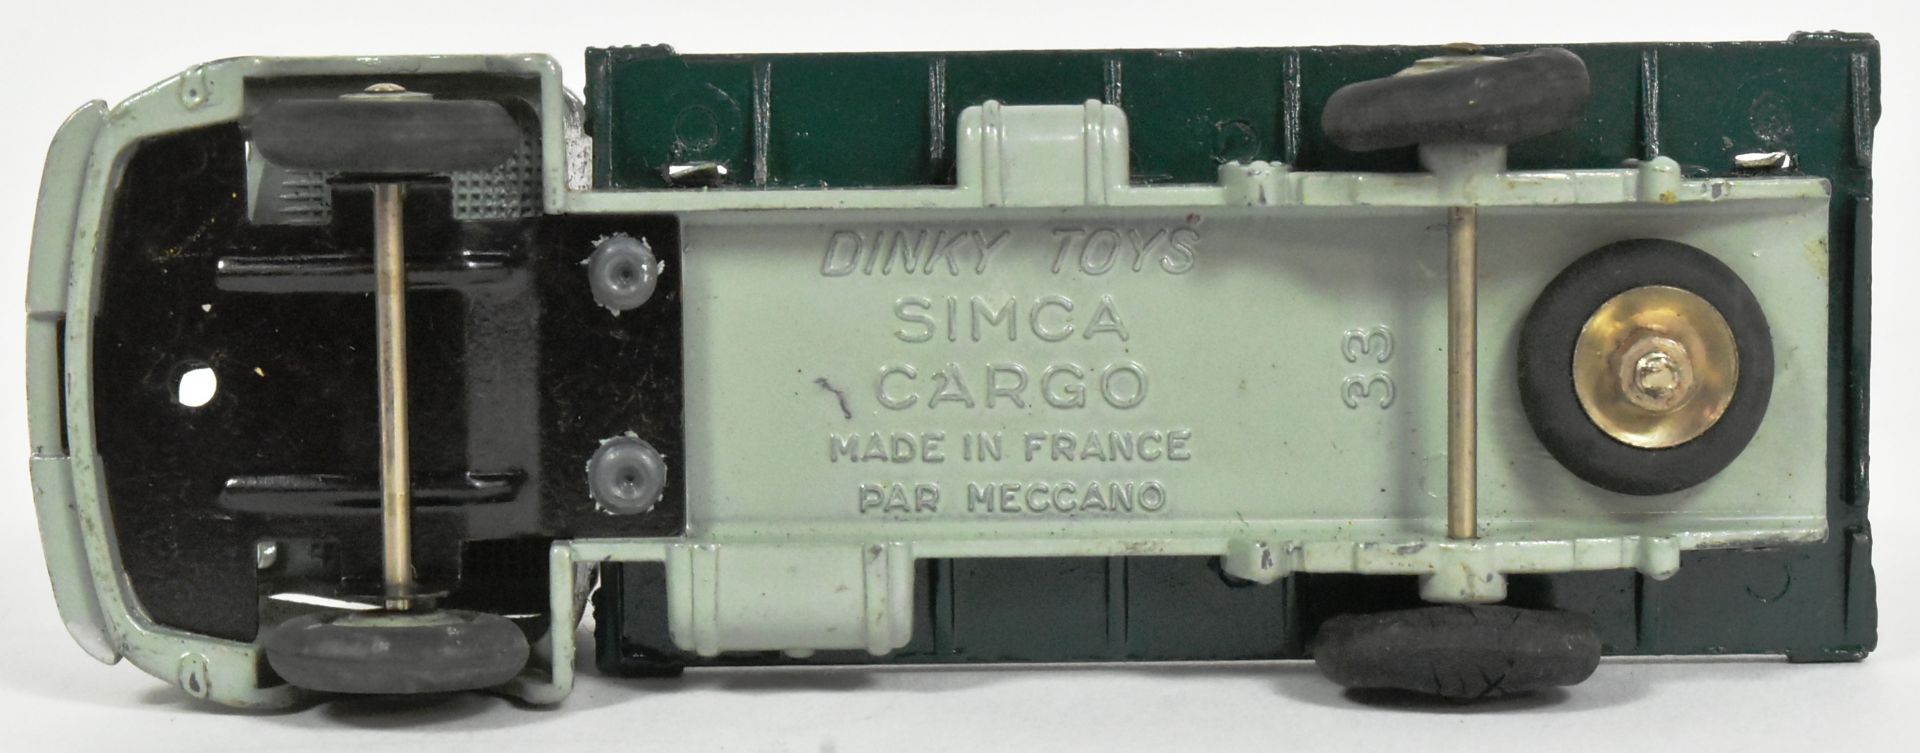 DIECAST - FRENCH DINKY TOYS - SIMCA CARGO & MULTI-BUCKET TRUCK - Image 5 of 6